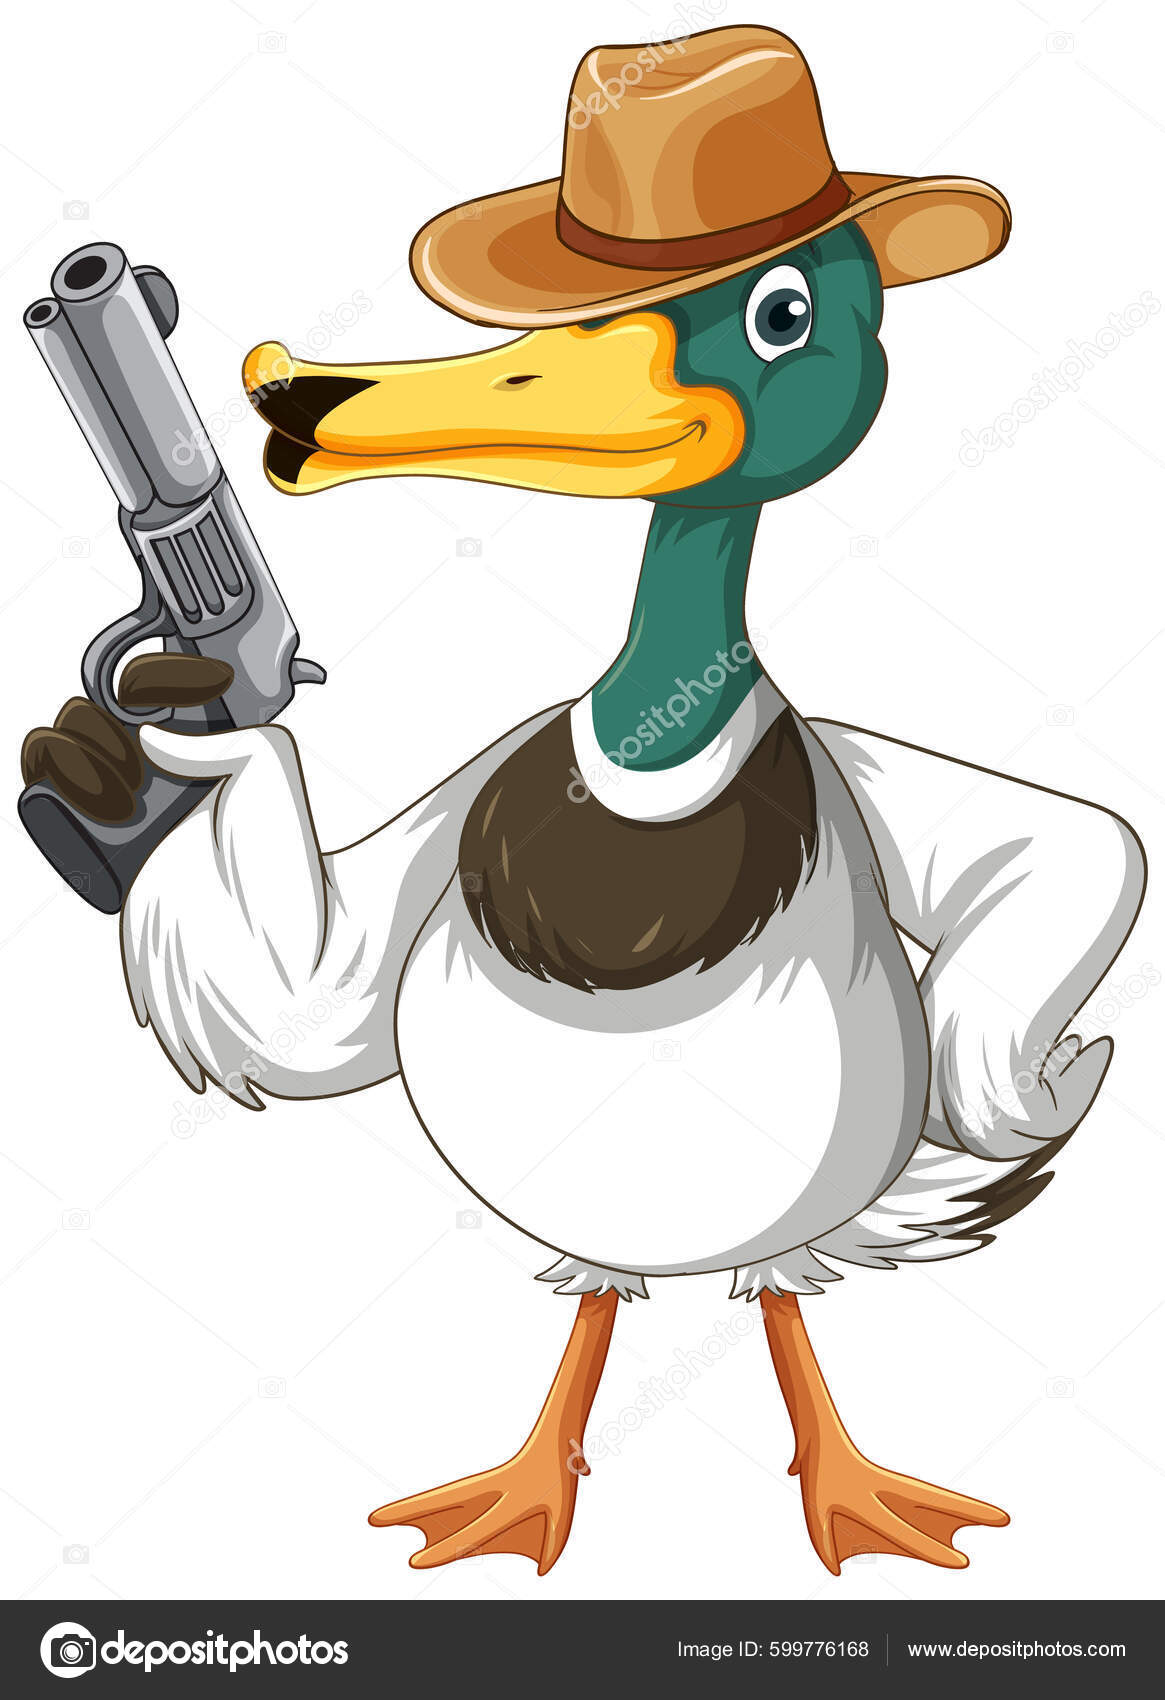 Cartoon West Duck Holding Gun Illustration Stock Vector Image by  ©interactimages #599776168